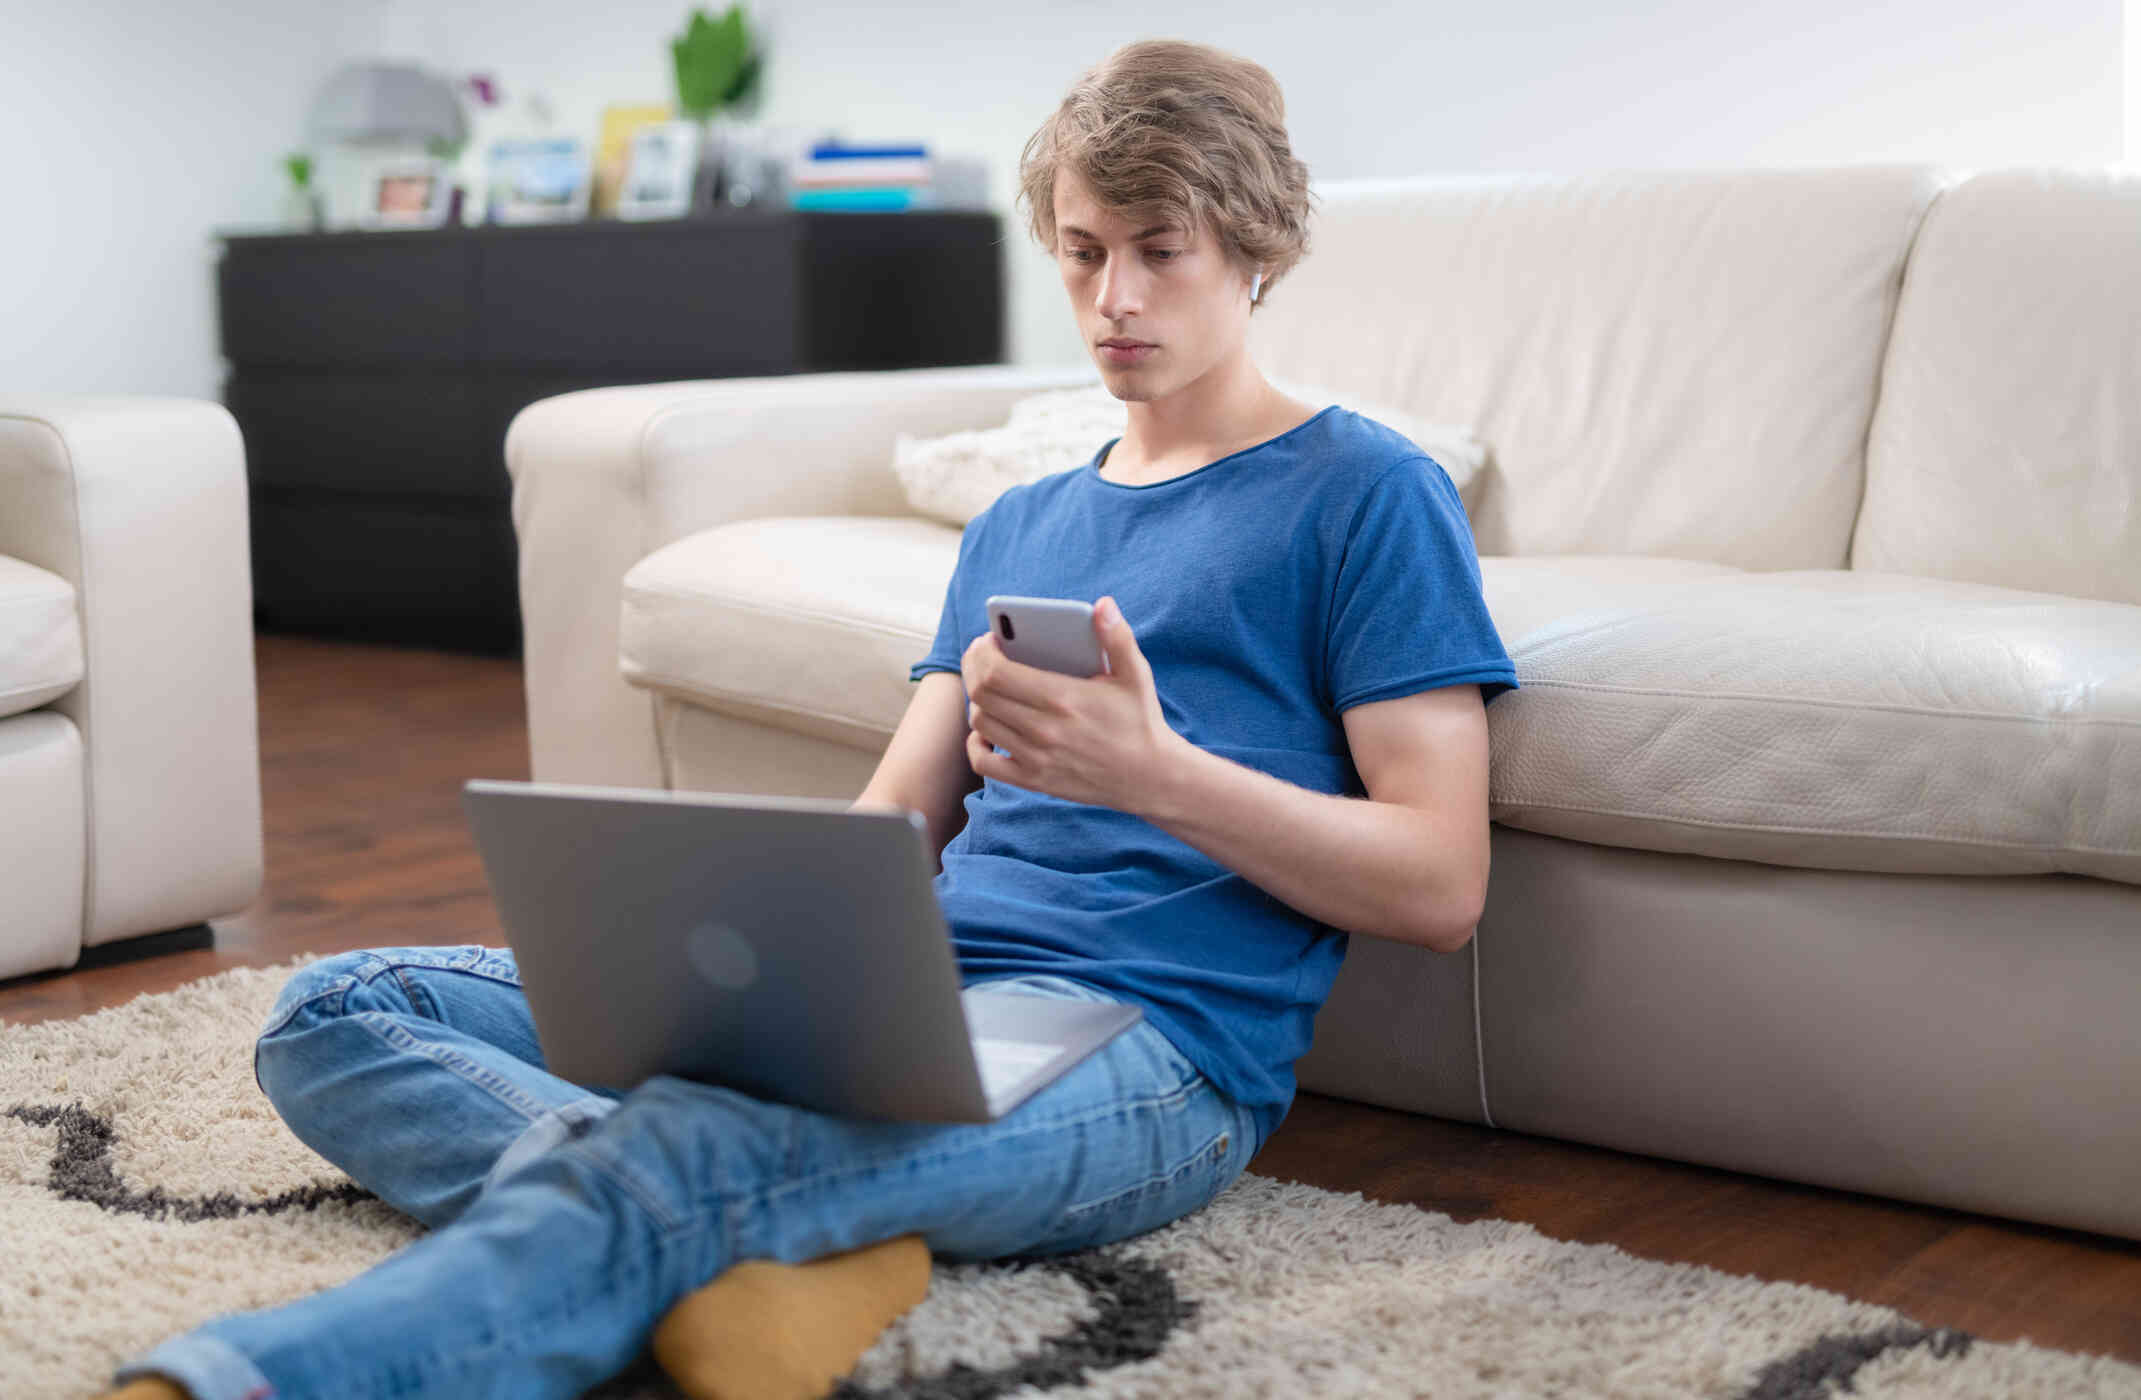 A teen boy in a blue shirt sits on the floor with his back against the couch and his laptop open in his lap while he looks down at the cellphone in his hand.